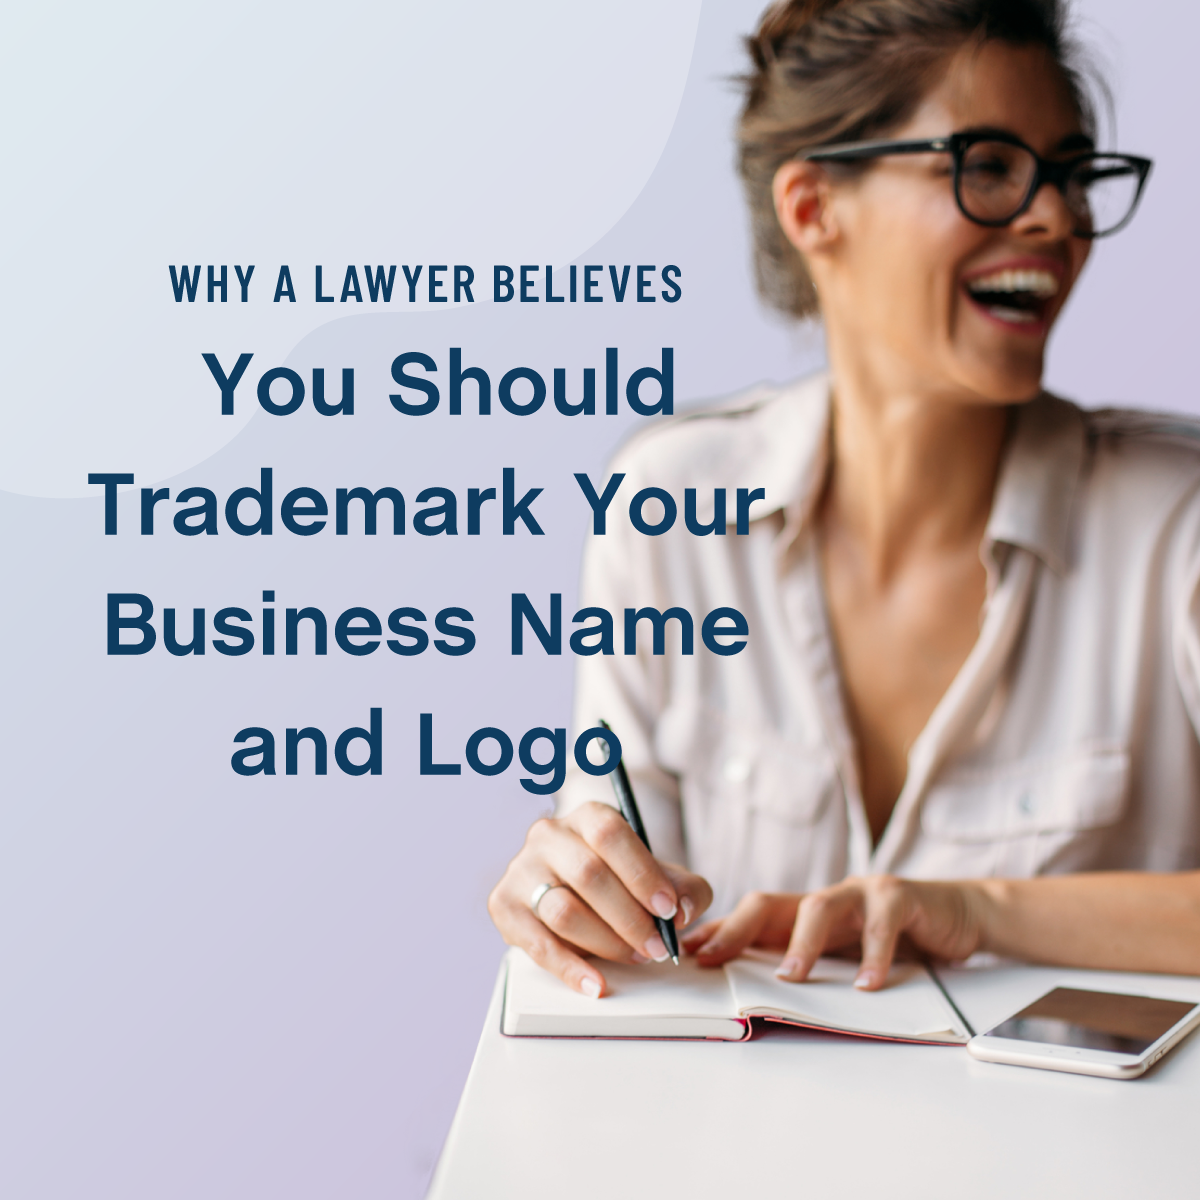 Why a Lawyer Believes You Should Trademark Your Business Name and Logo